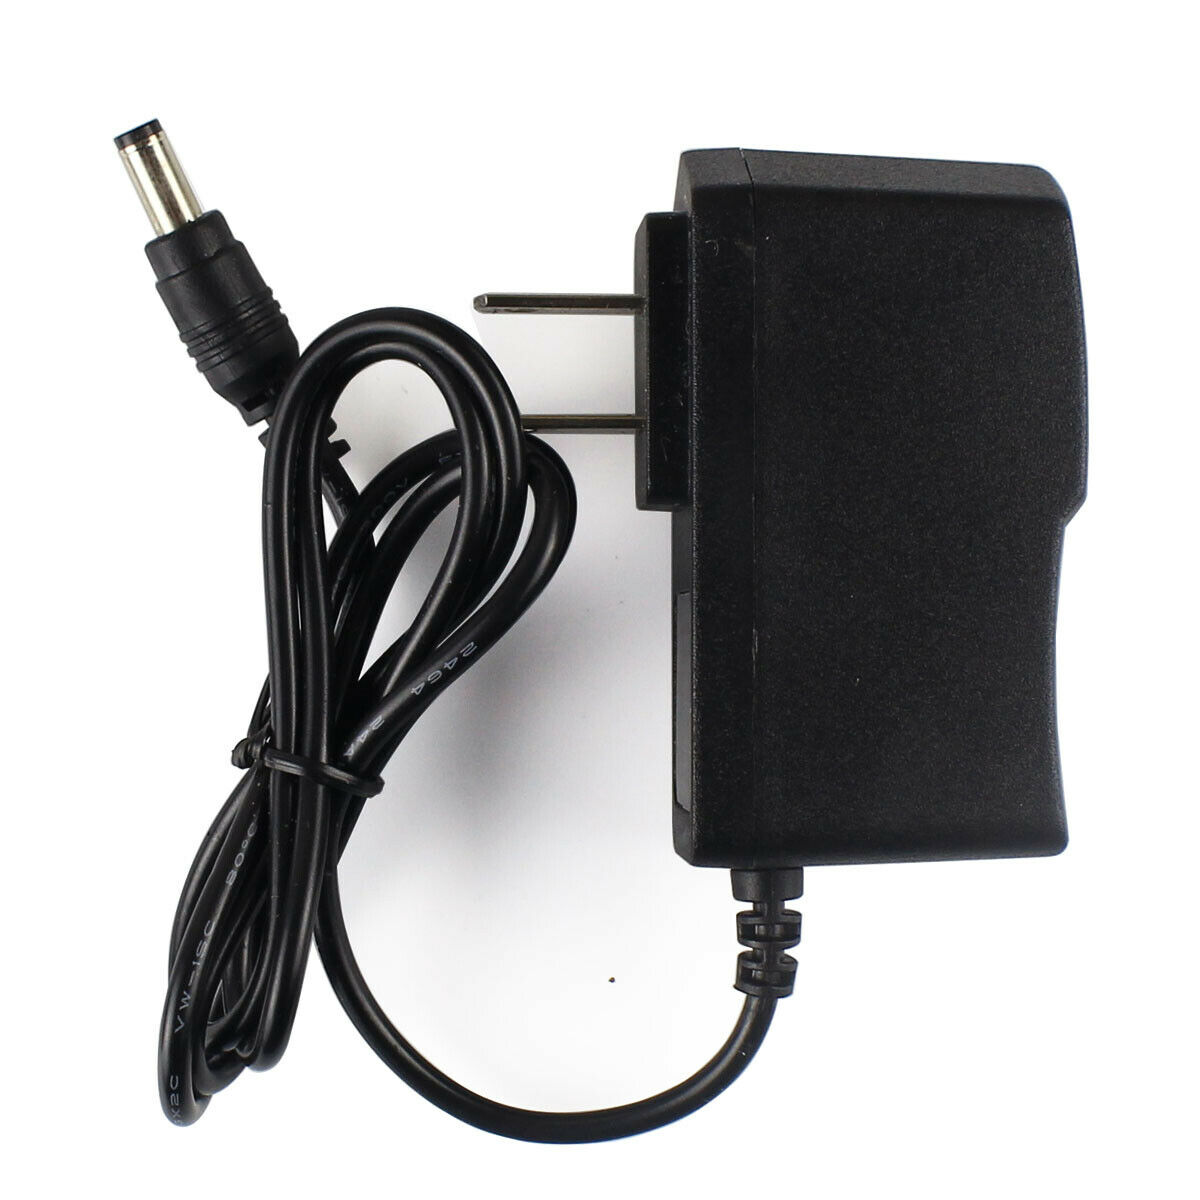 NEW AC Adapter For Metrologic Honeywell 3A-052WP05 P/N: 00-06324 DC Power Supply